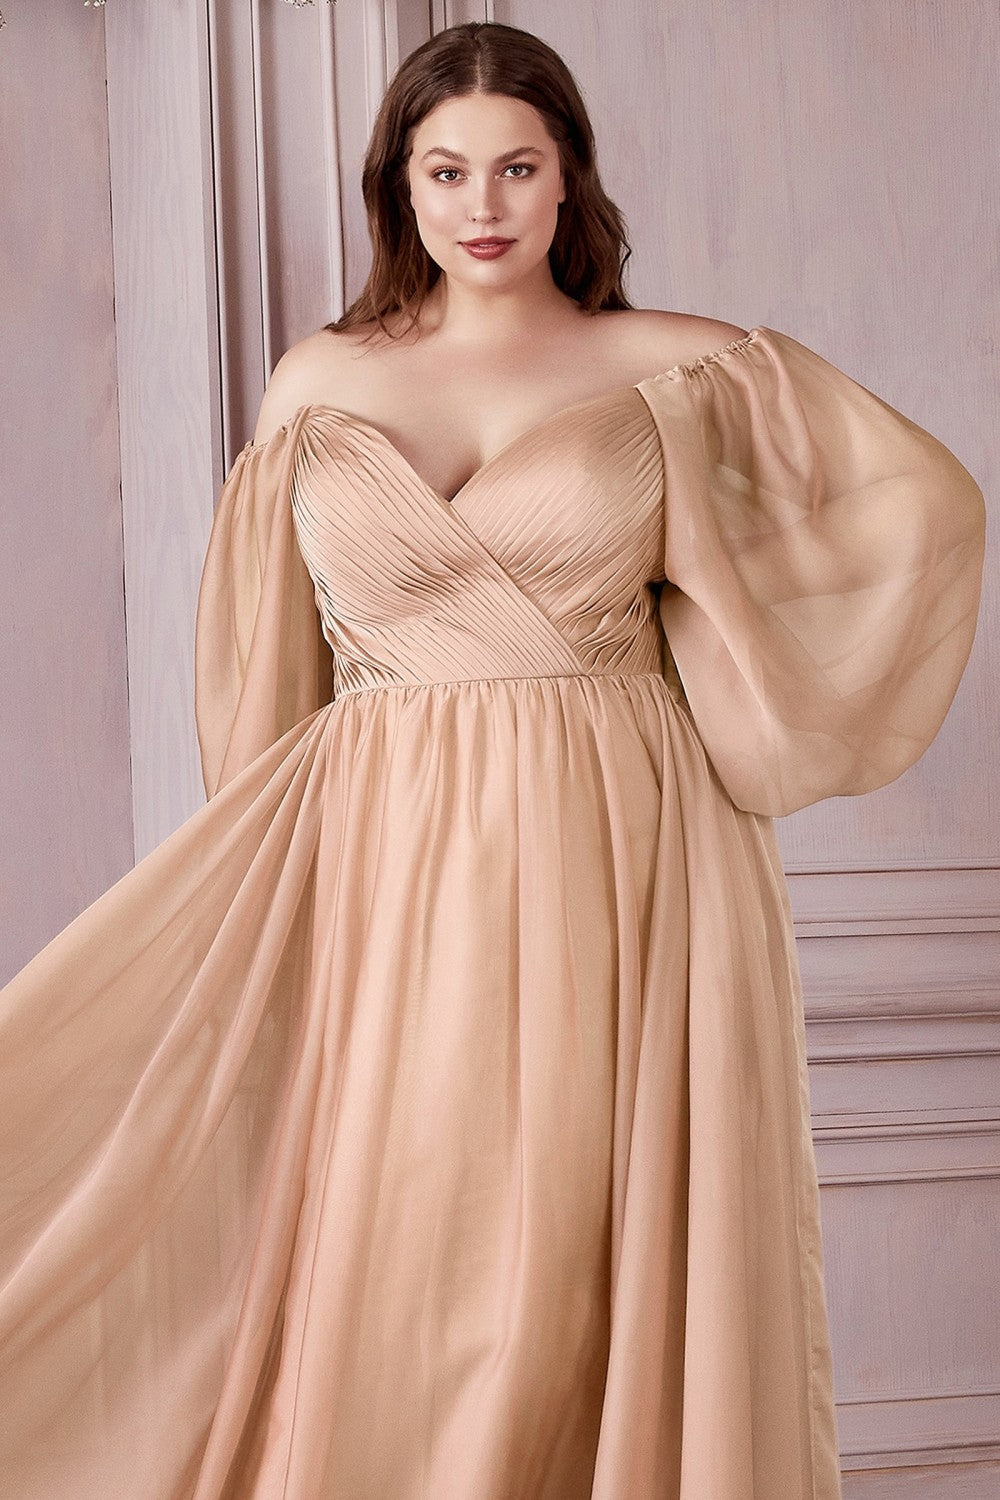 Classic Evening & Prom Dresses Long Sleeves Bodice A-line Chiffon Gown Plus Size Luxury Royal Style CDCD243C Elsy Style Prom Dress